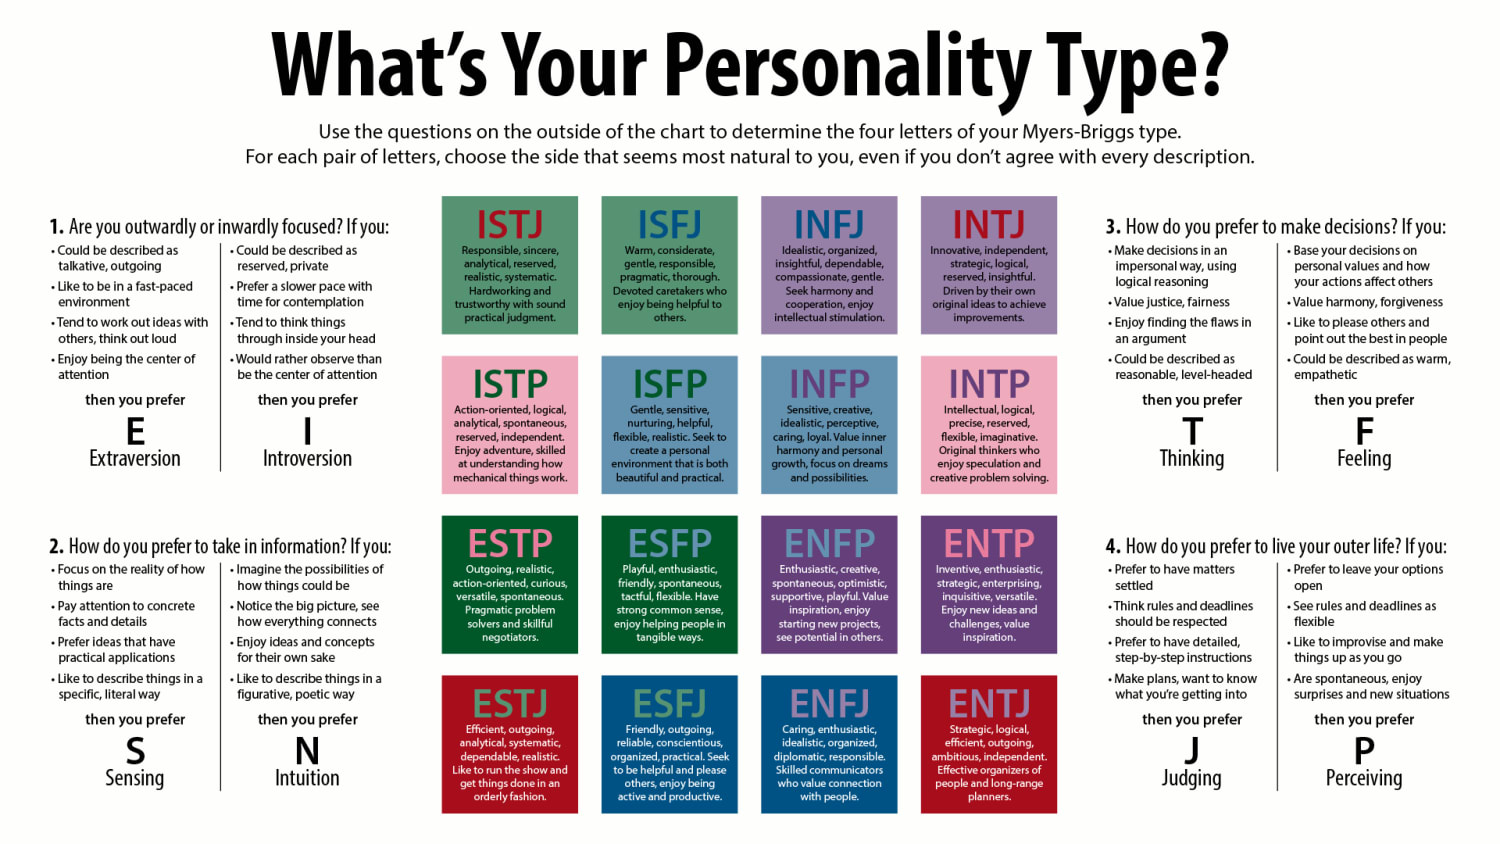 Myers-Briggs personality types